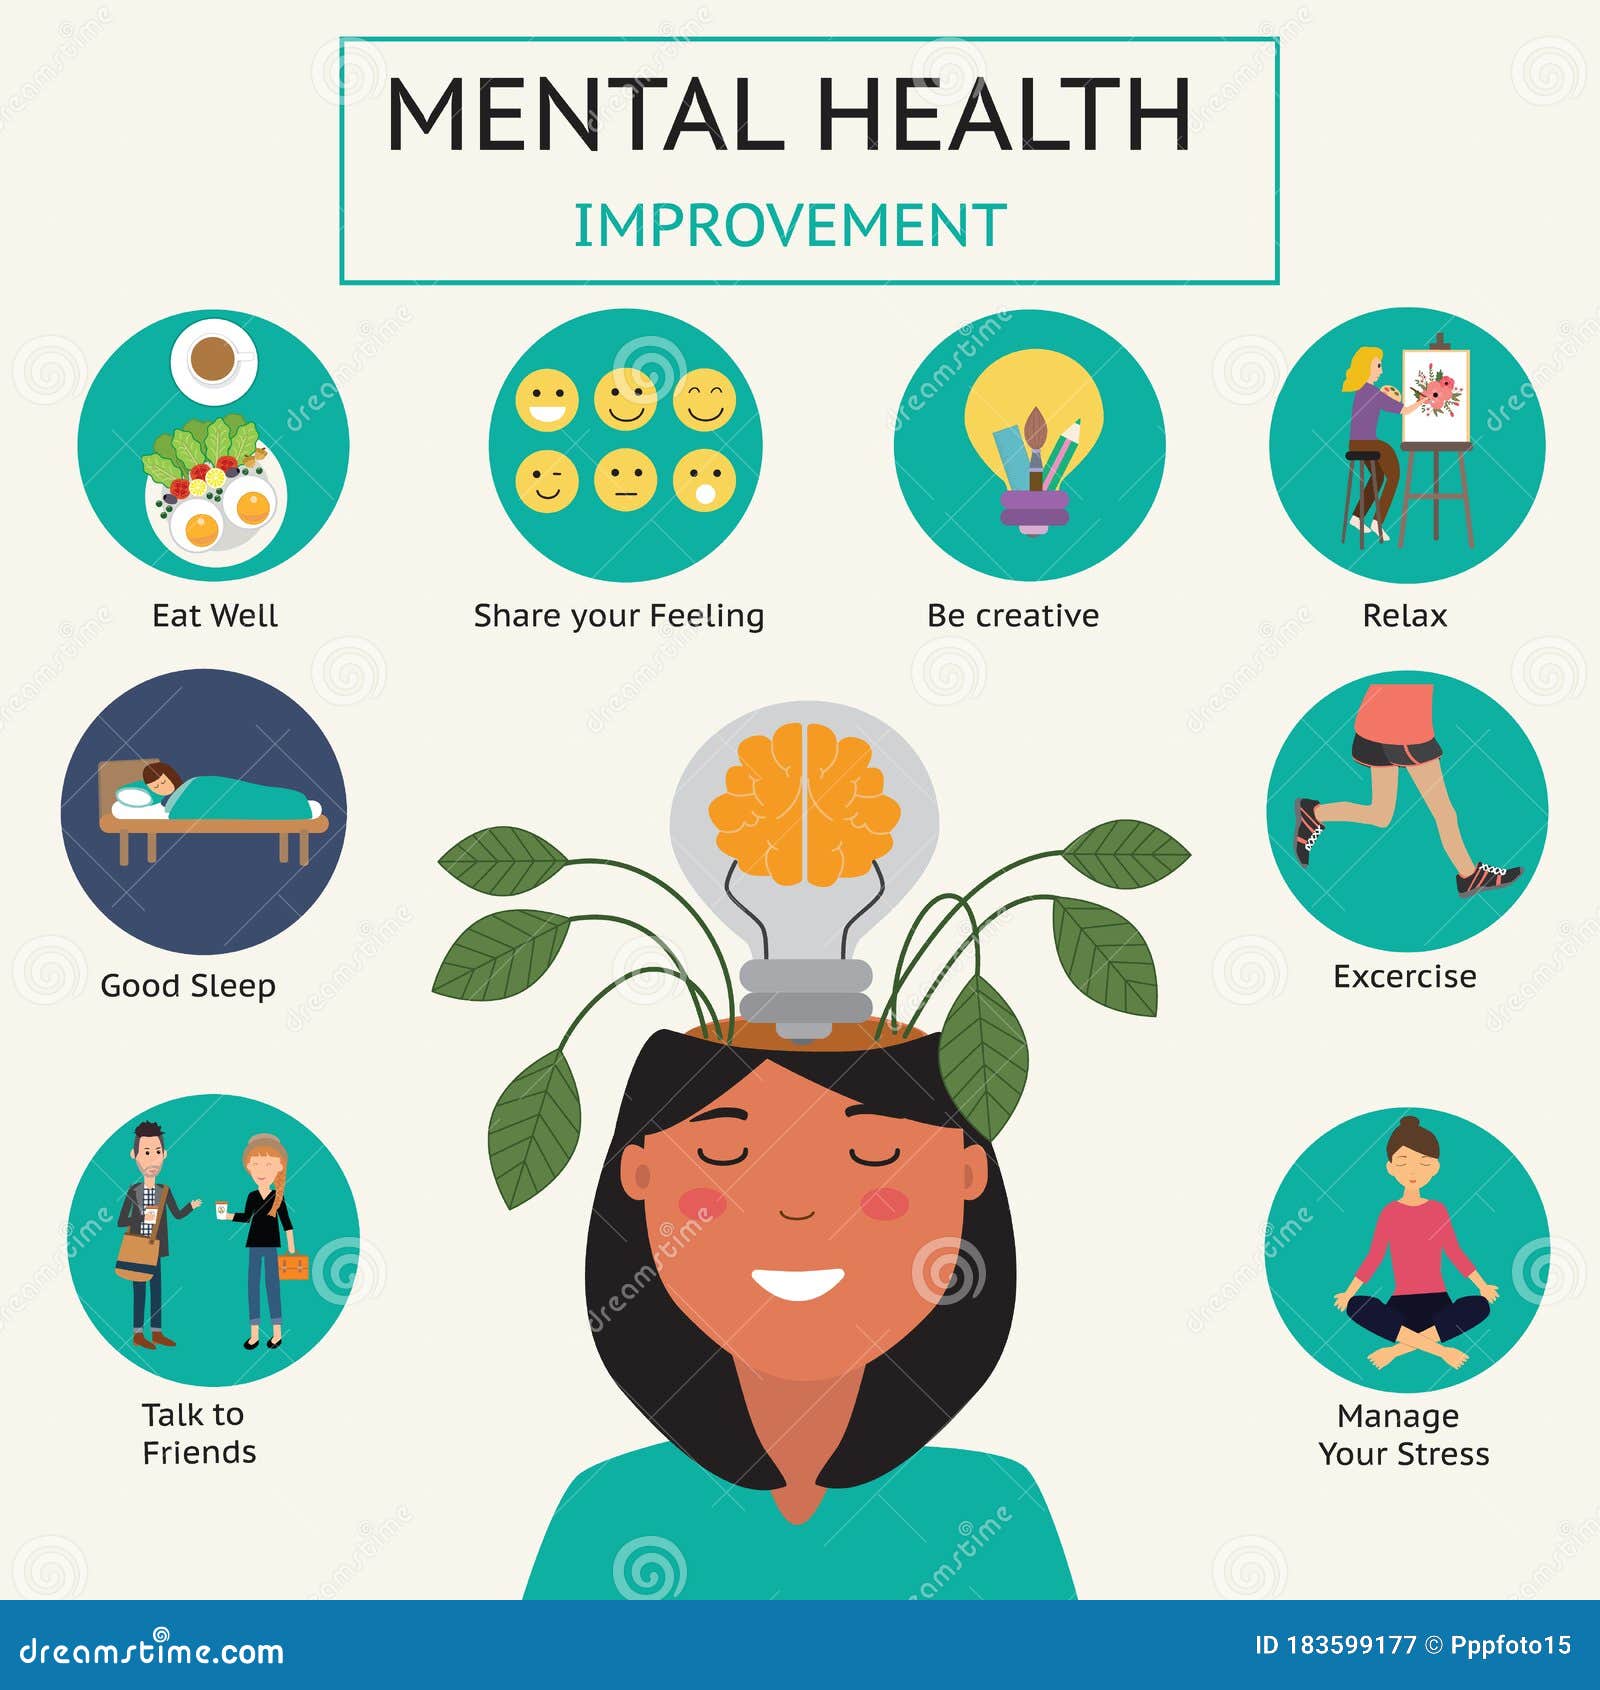 How To Improve Your Mental Health Infographic.vector.EPS10.illustration